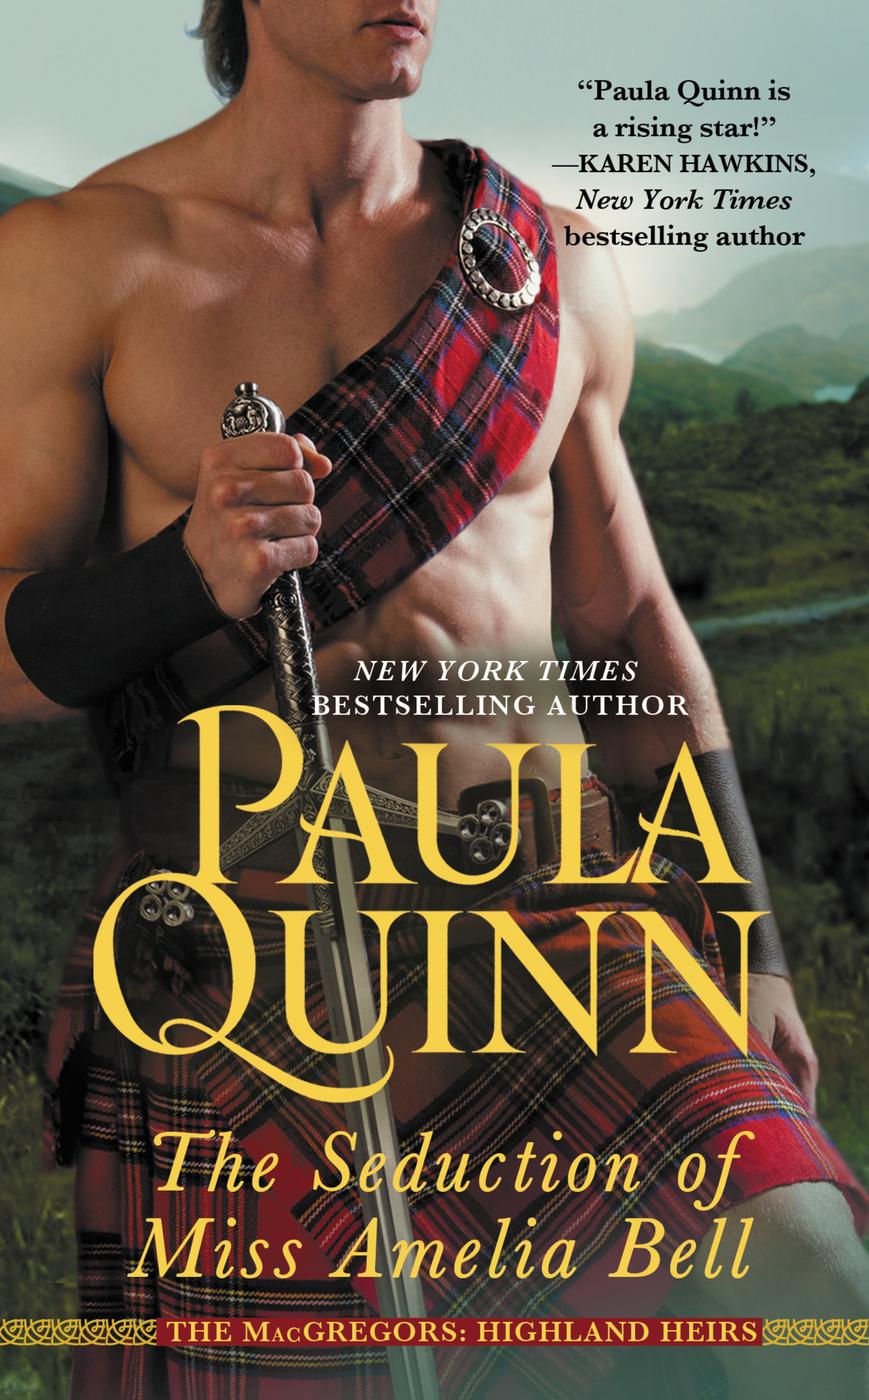 The Seduction of Miss Amelia Bell (2014) by Paula Quinn